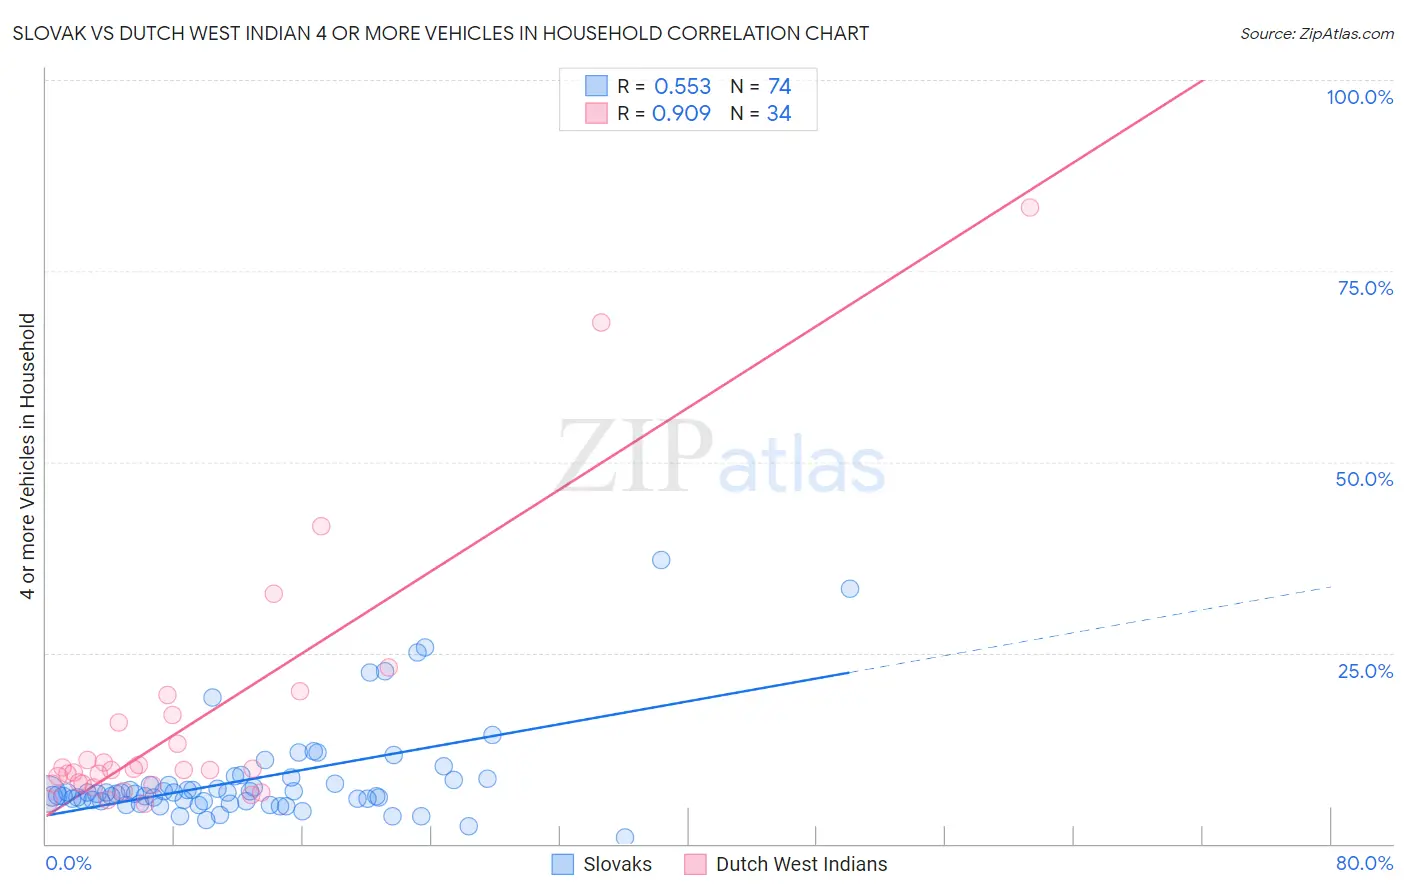 Slovak vs Dutch West Indian 4 or more Vehicles in Household